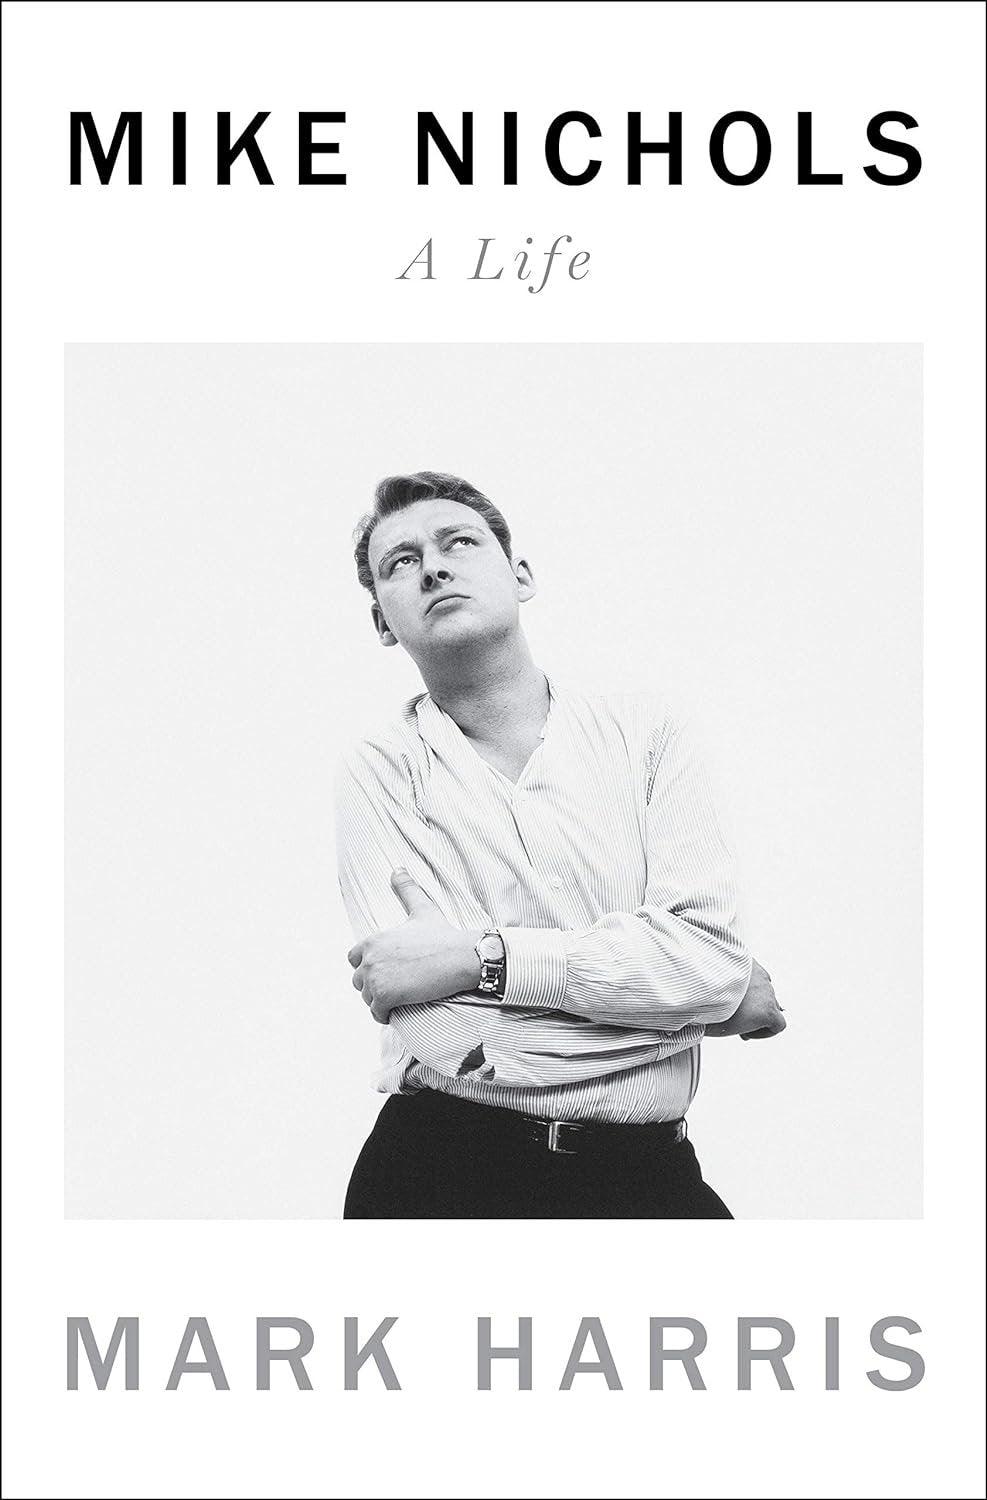 Mike Nichols: A Life - Used Like New - ZXASQW Funny Name. Free Shipping.